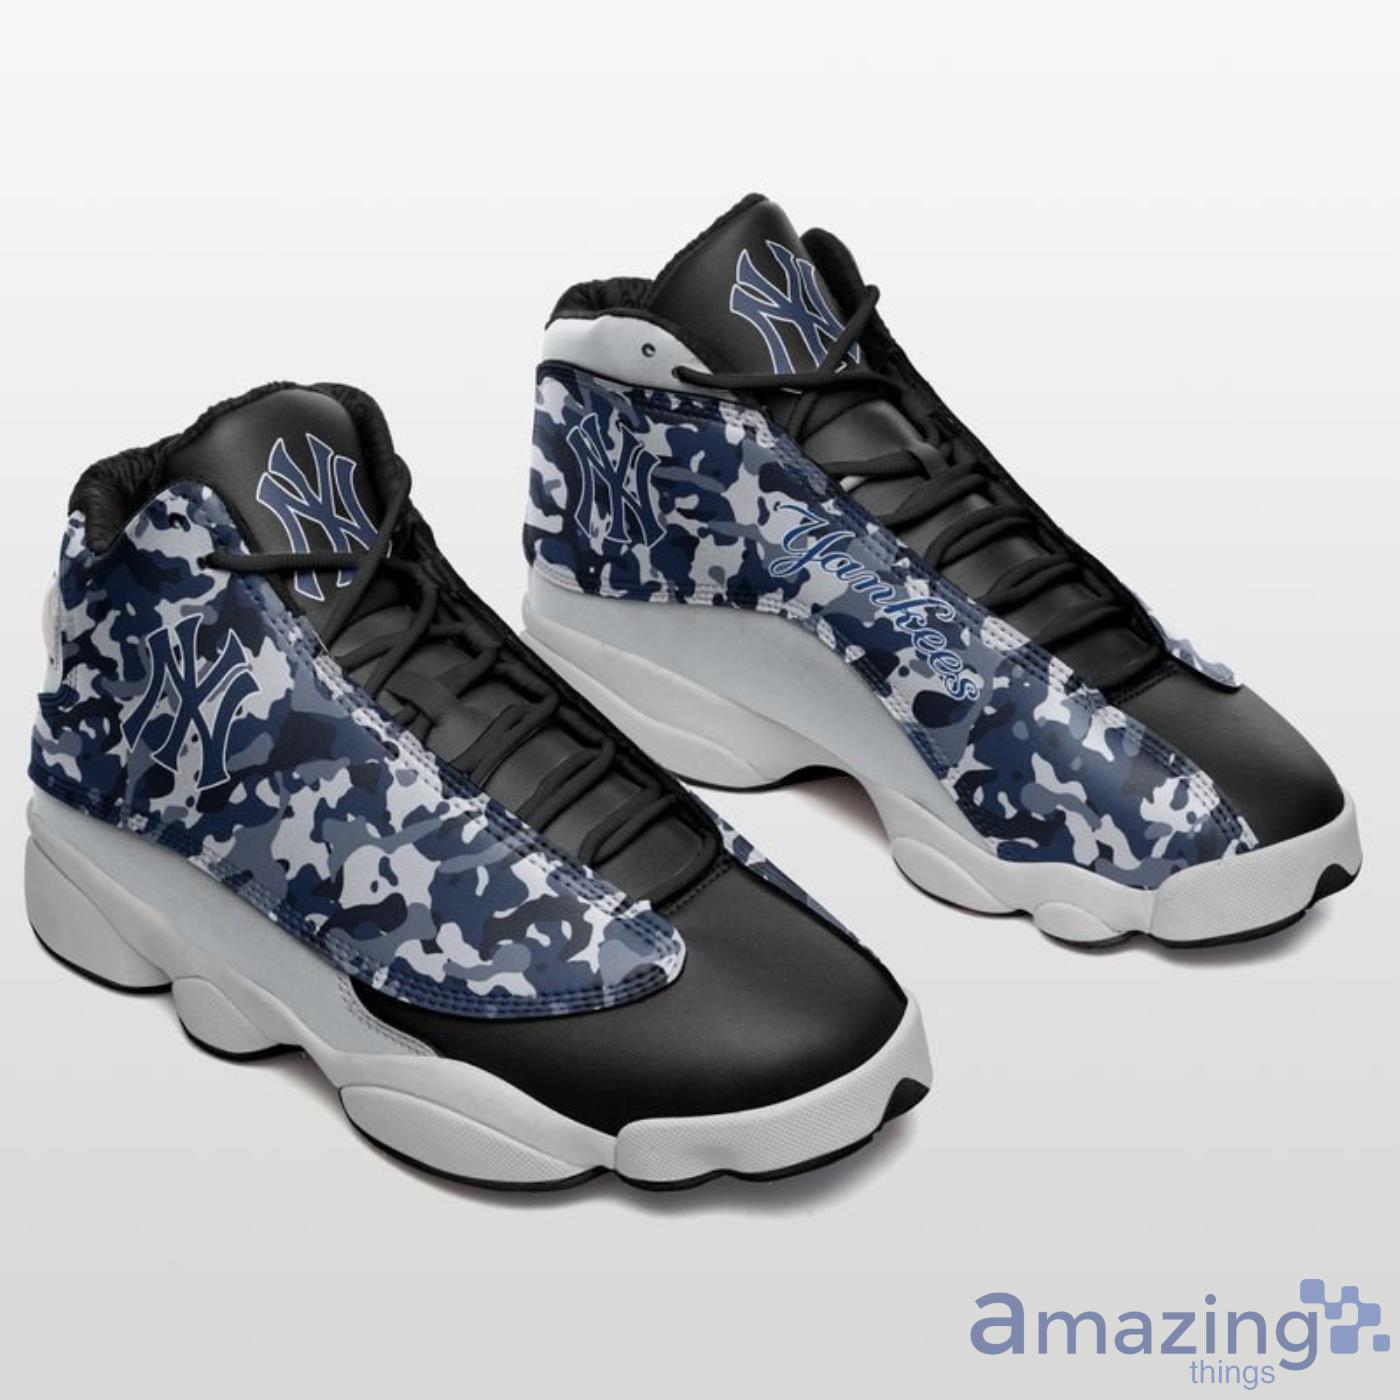 New York Yankees Limited Edition Air Jordan 13 For Fans